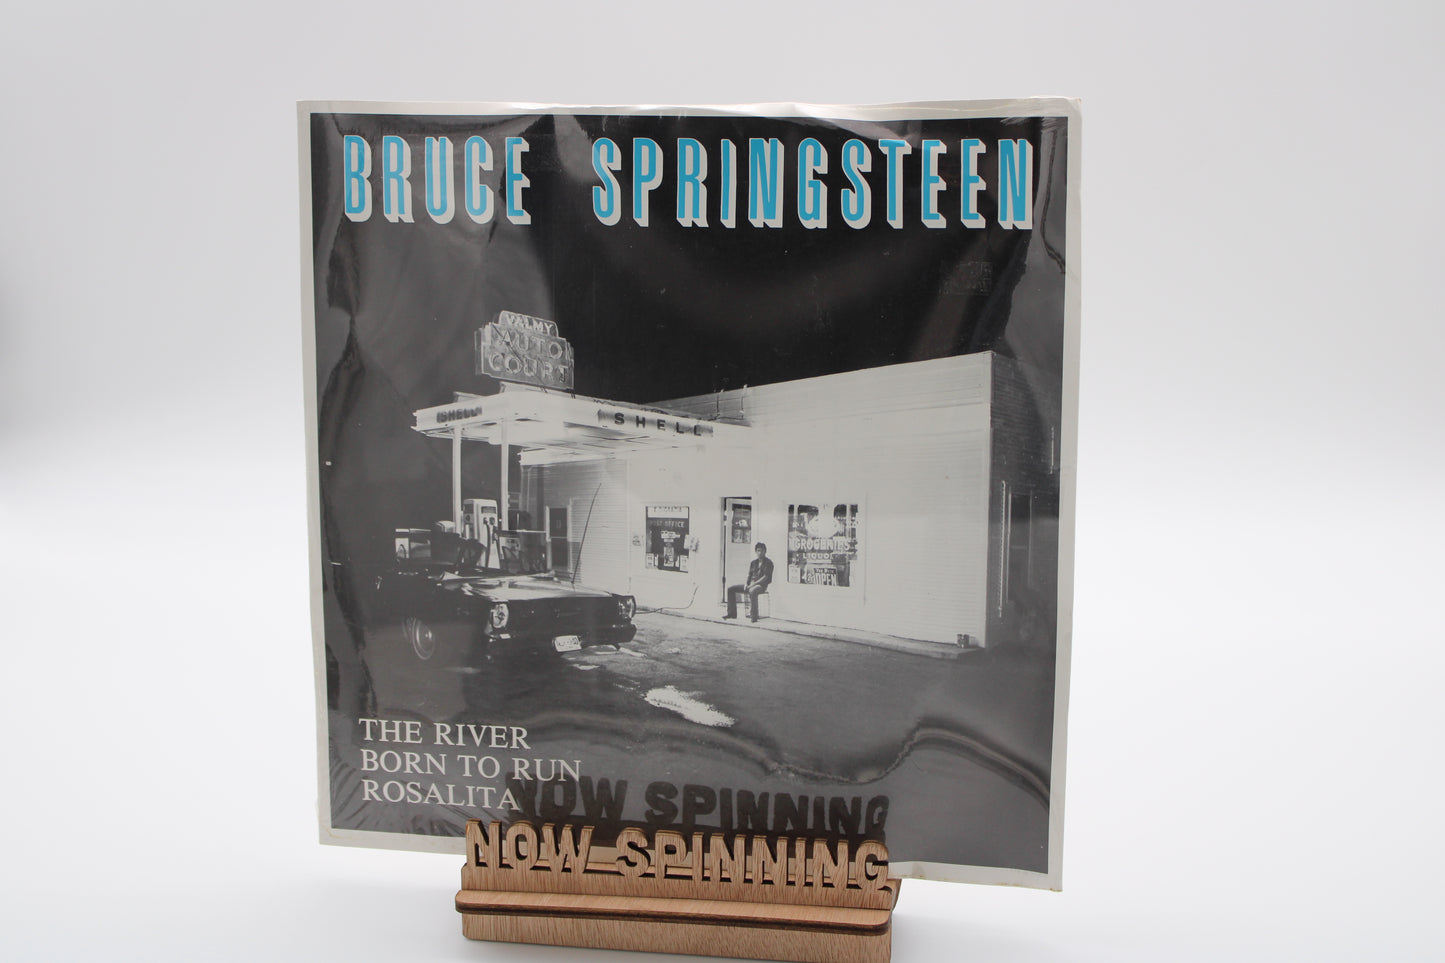 Bruce Springsteen Sealed 12" Vinyl EP on CBS Records - The River, Born to Run, Rosalita 1981 Sealed Collectible